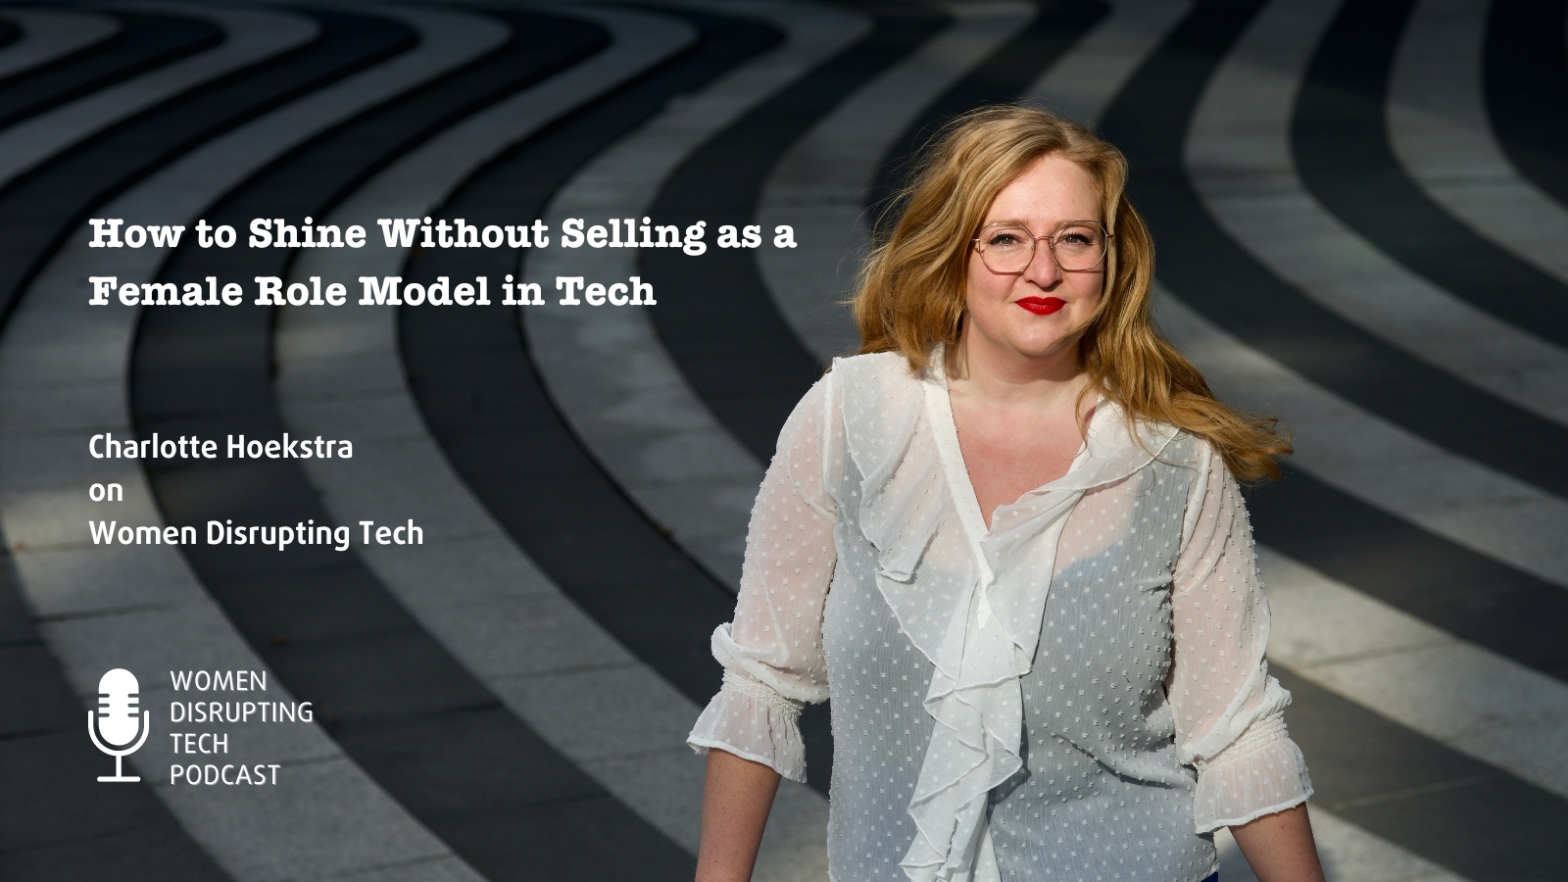 Picture of Charlotte Hoekstra with the title of episode 48 of Women Disrupting Tech. Follow the link to listen to the episode